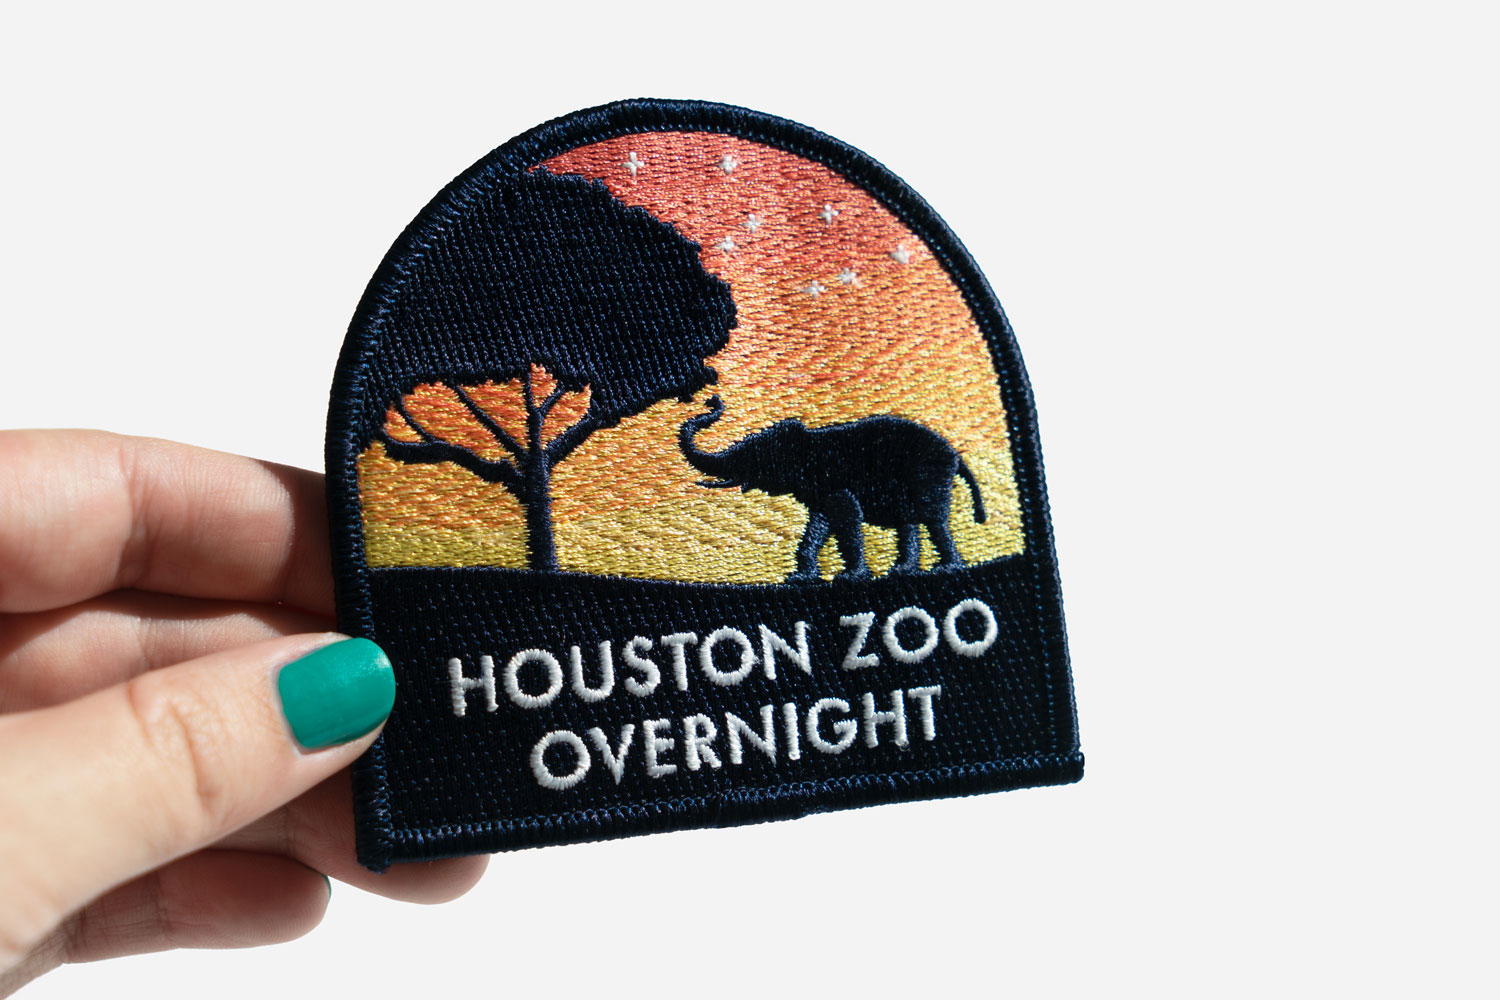 Houston-Zoo-Overnights-Patch-1